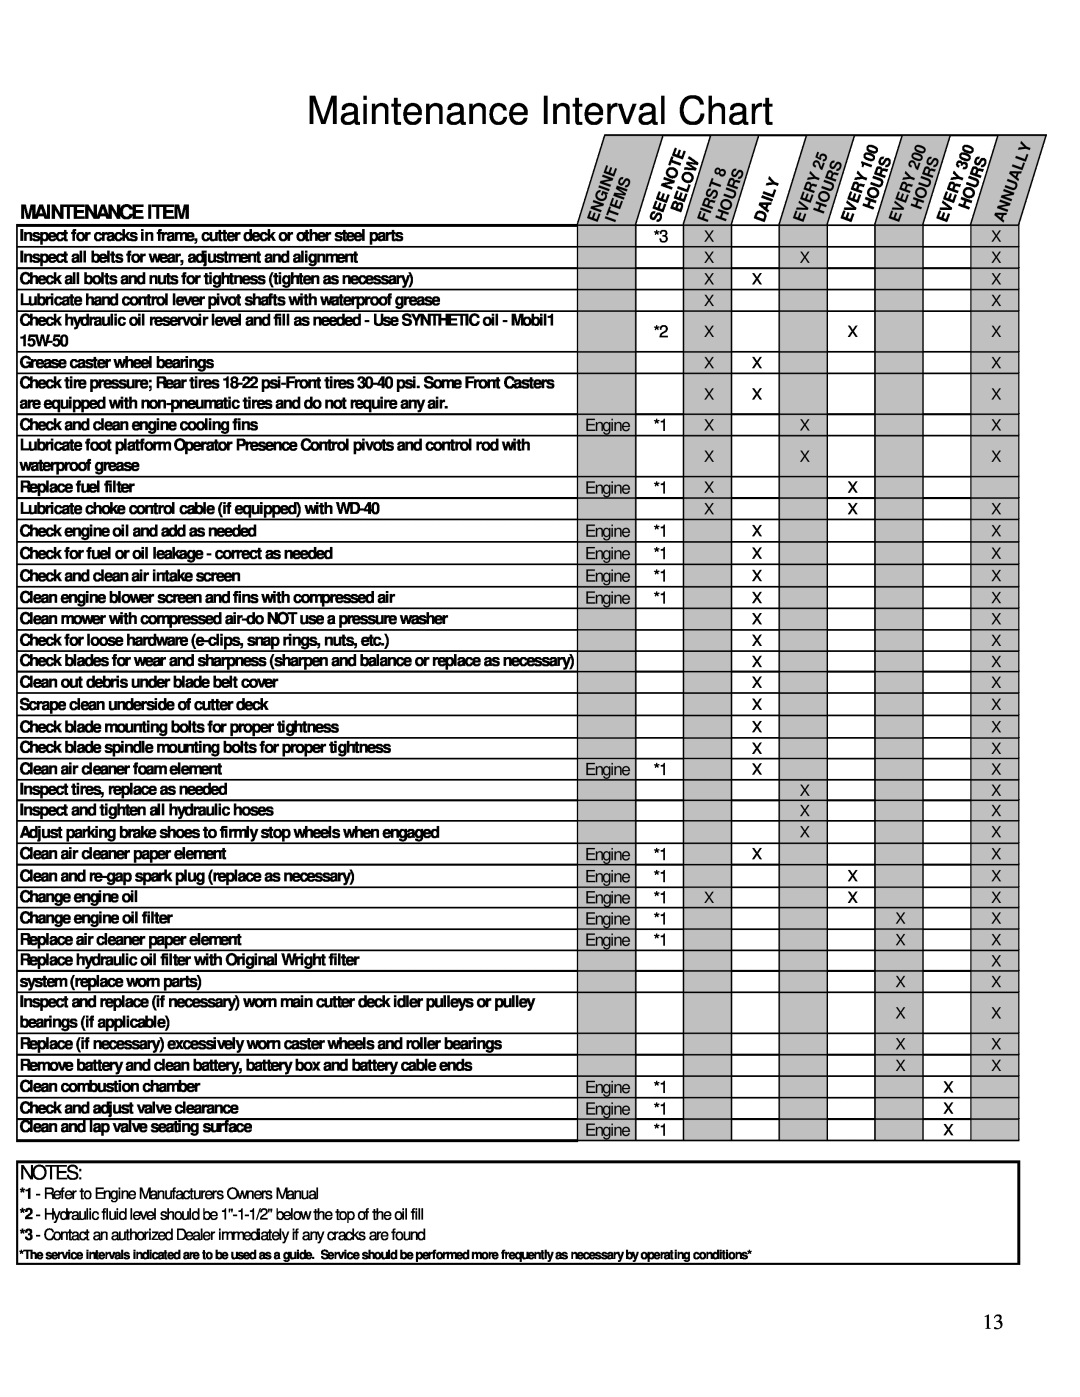 Wright Manufacturing 26077 owner manual Maintenance Interval Chart, Maintenance Item 